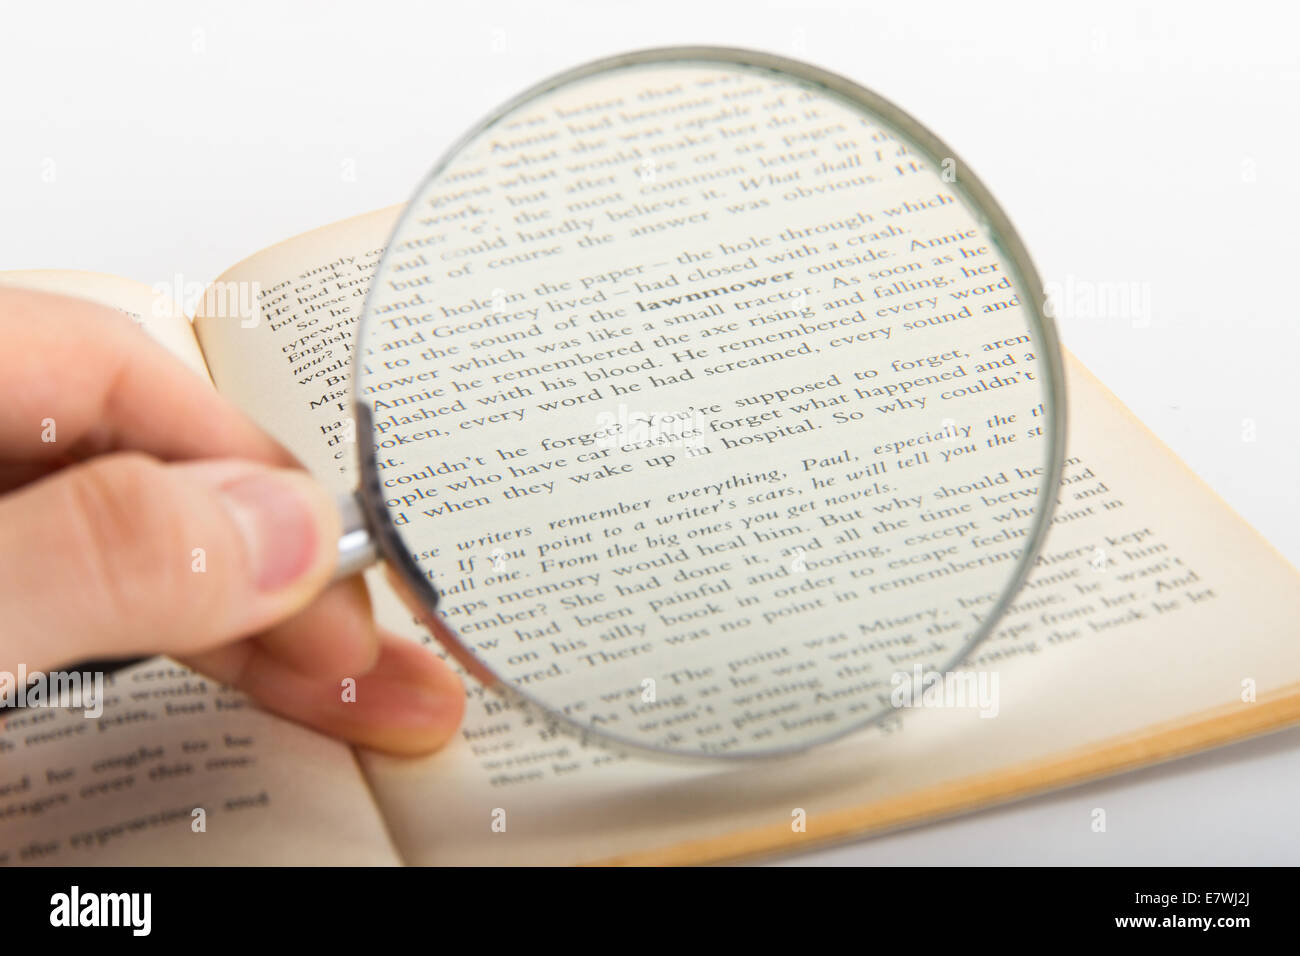 Hand holding classic style magnifying glass and examining reading book, isolated on white background. Stock Photo